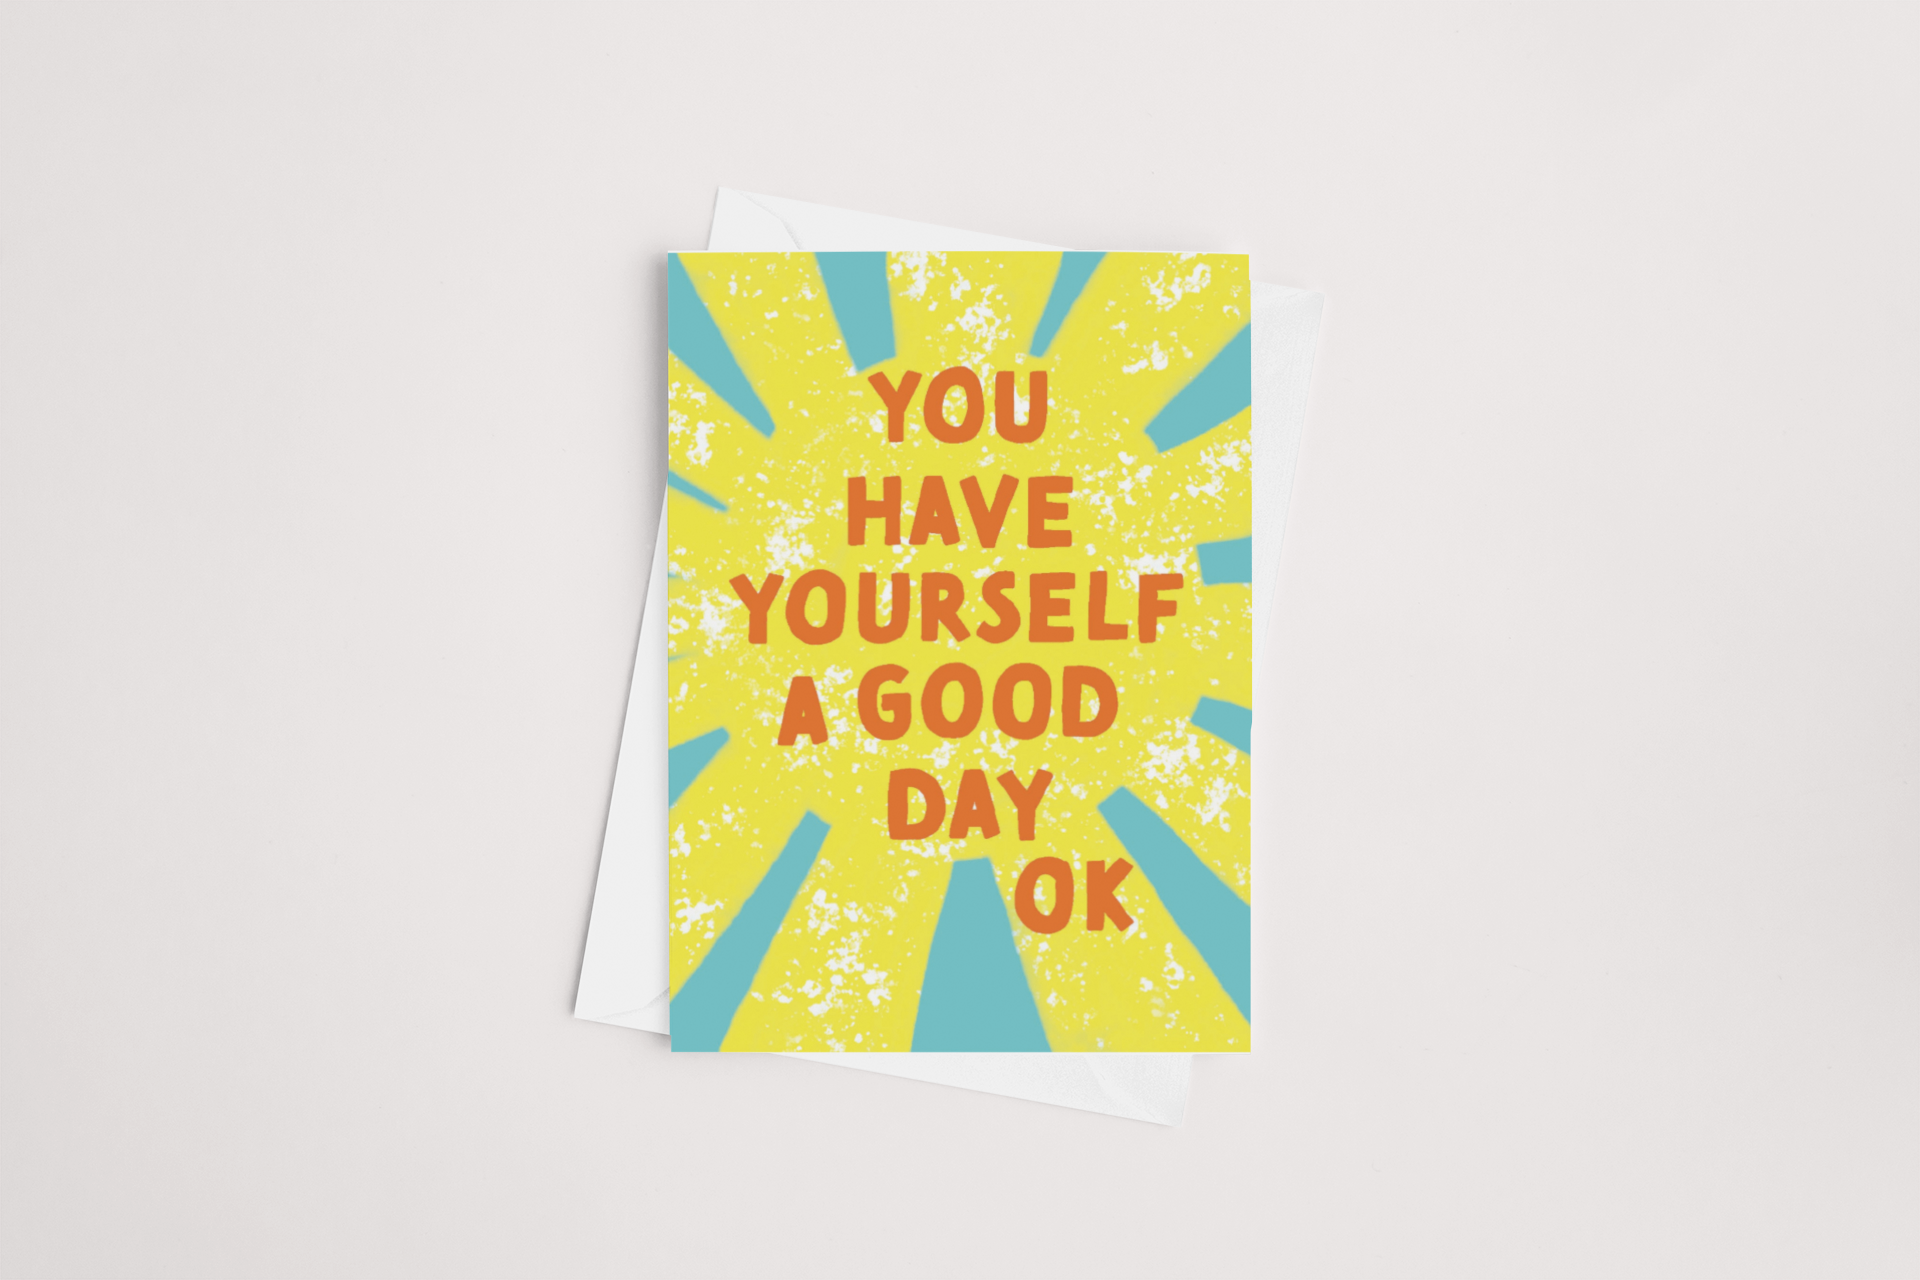 you have yourself a good day ok greeting card